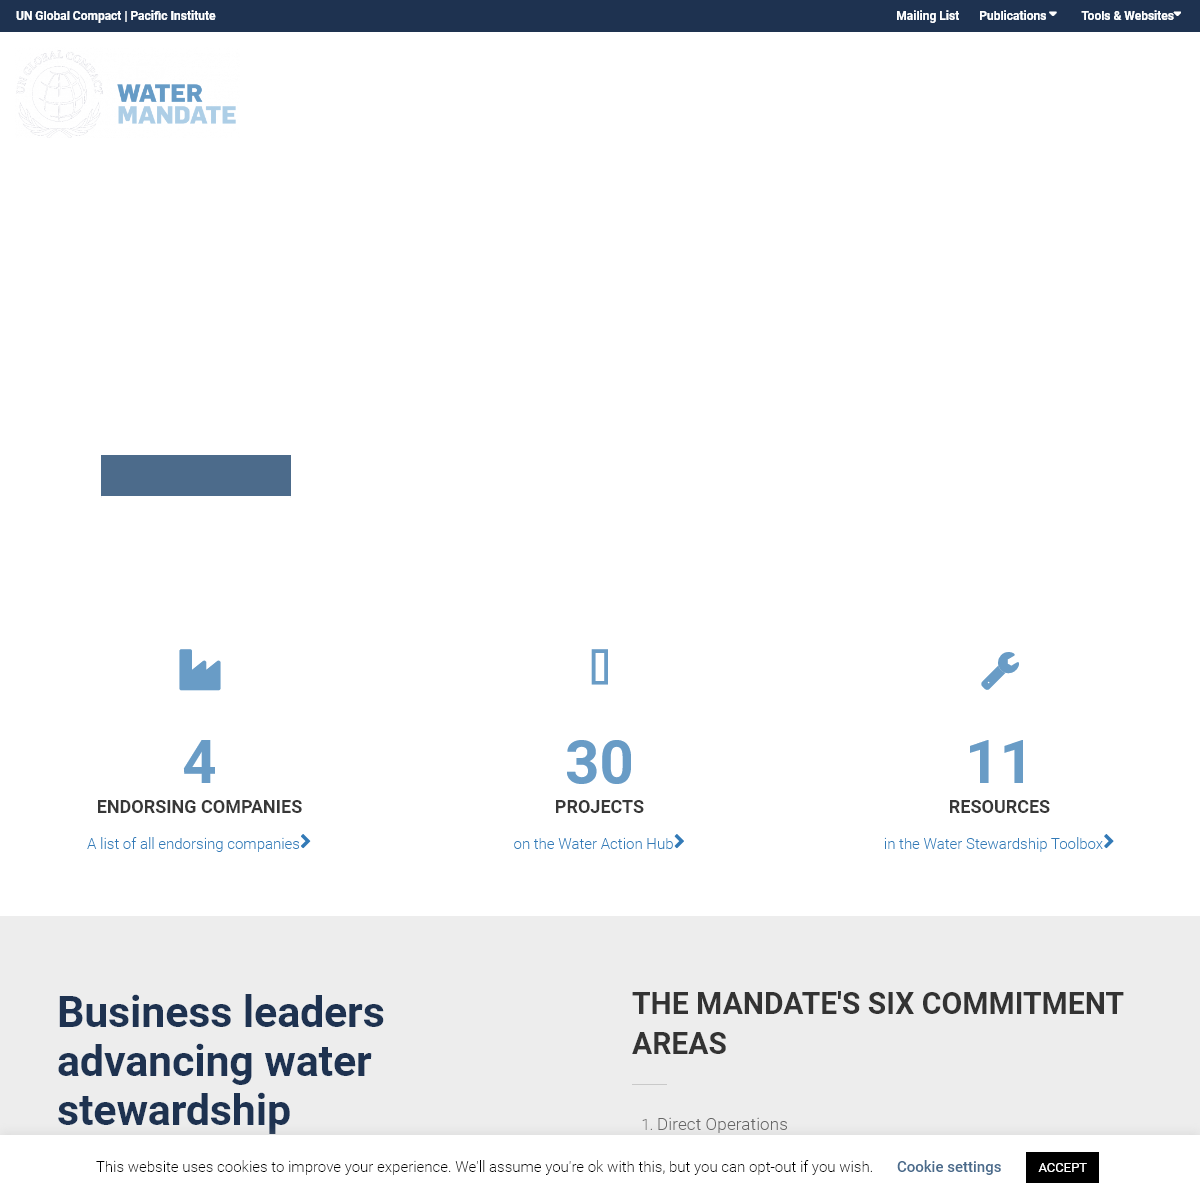 A complete backup of ceowatermandate.org